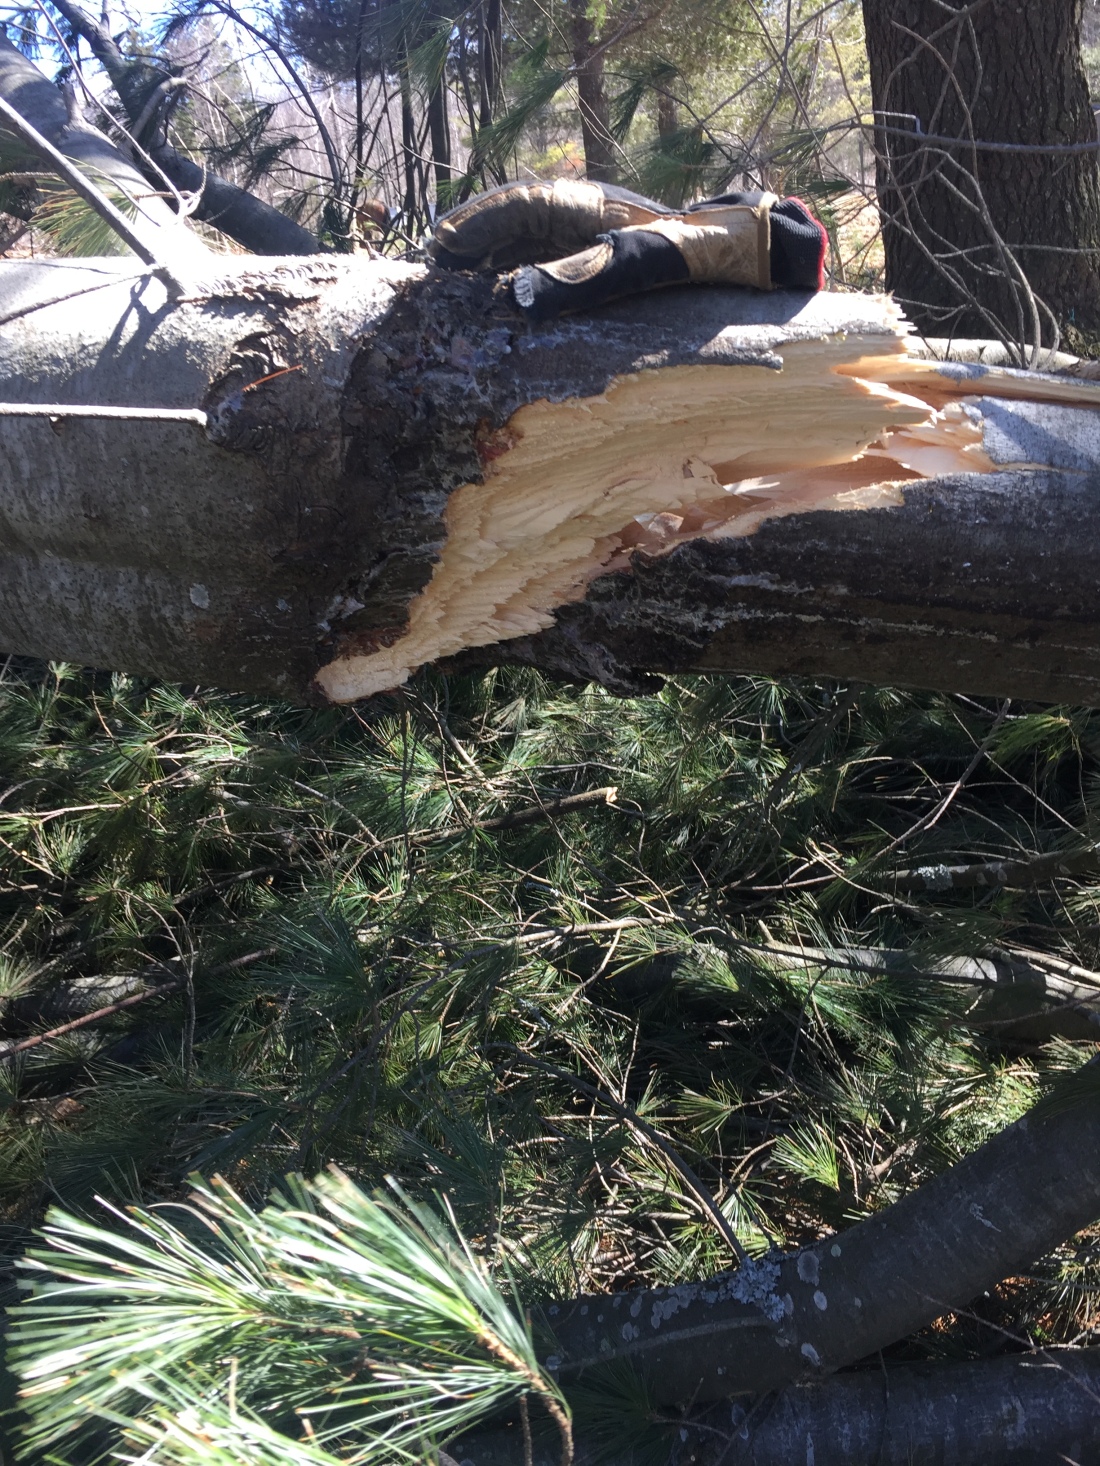 a large pine limb is broken in half from when it hit the ground; there is a glove on the limb to show size